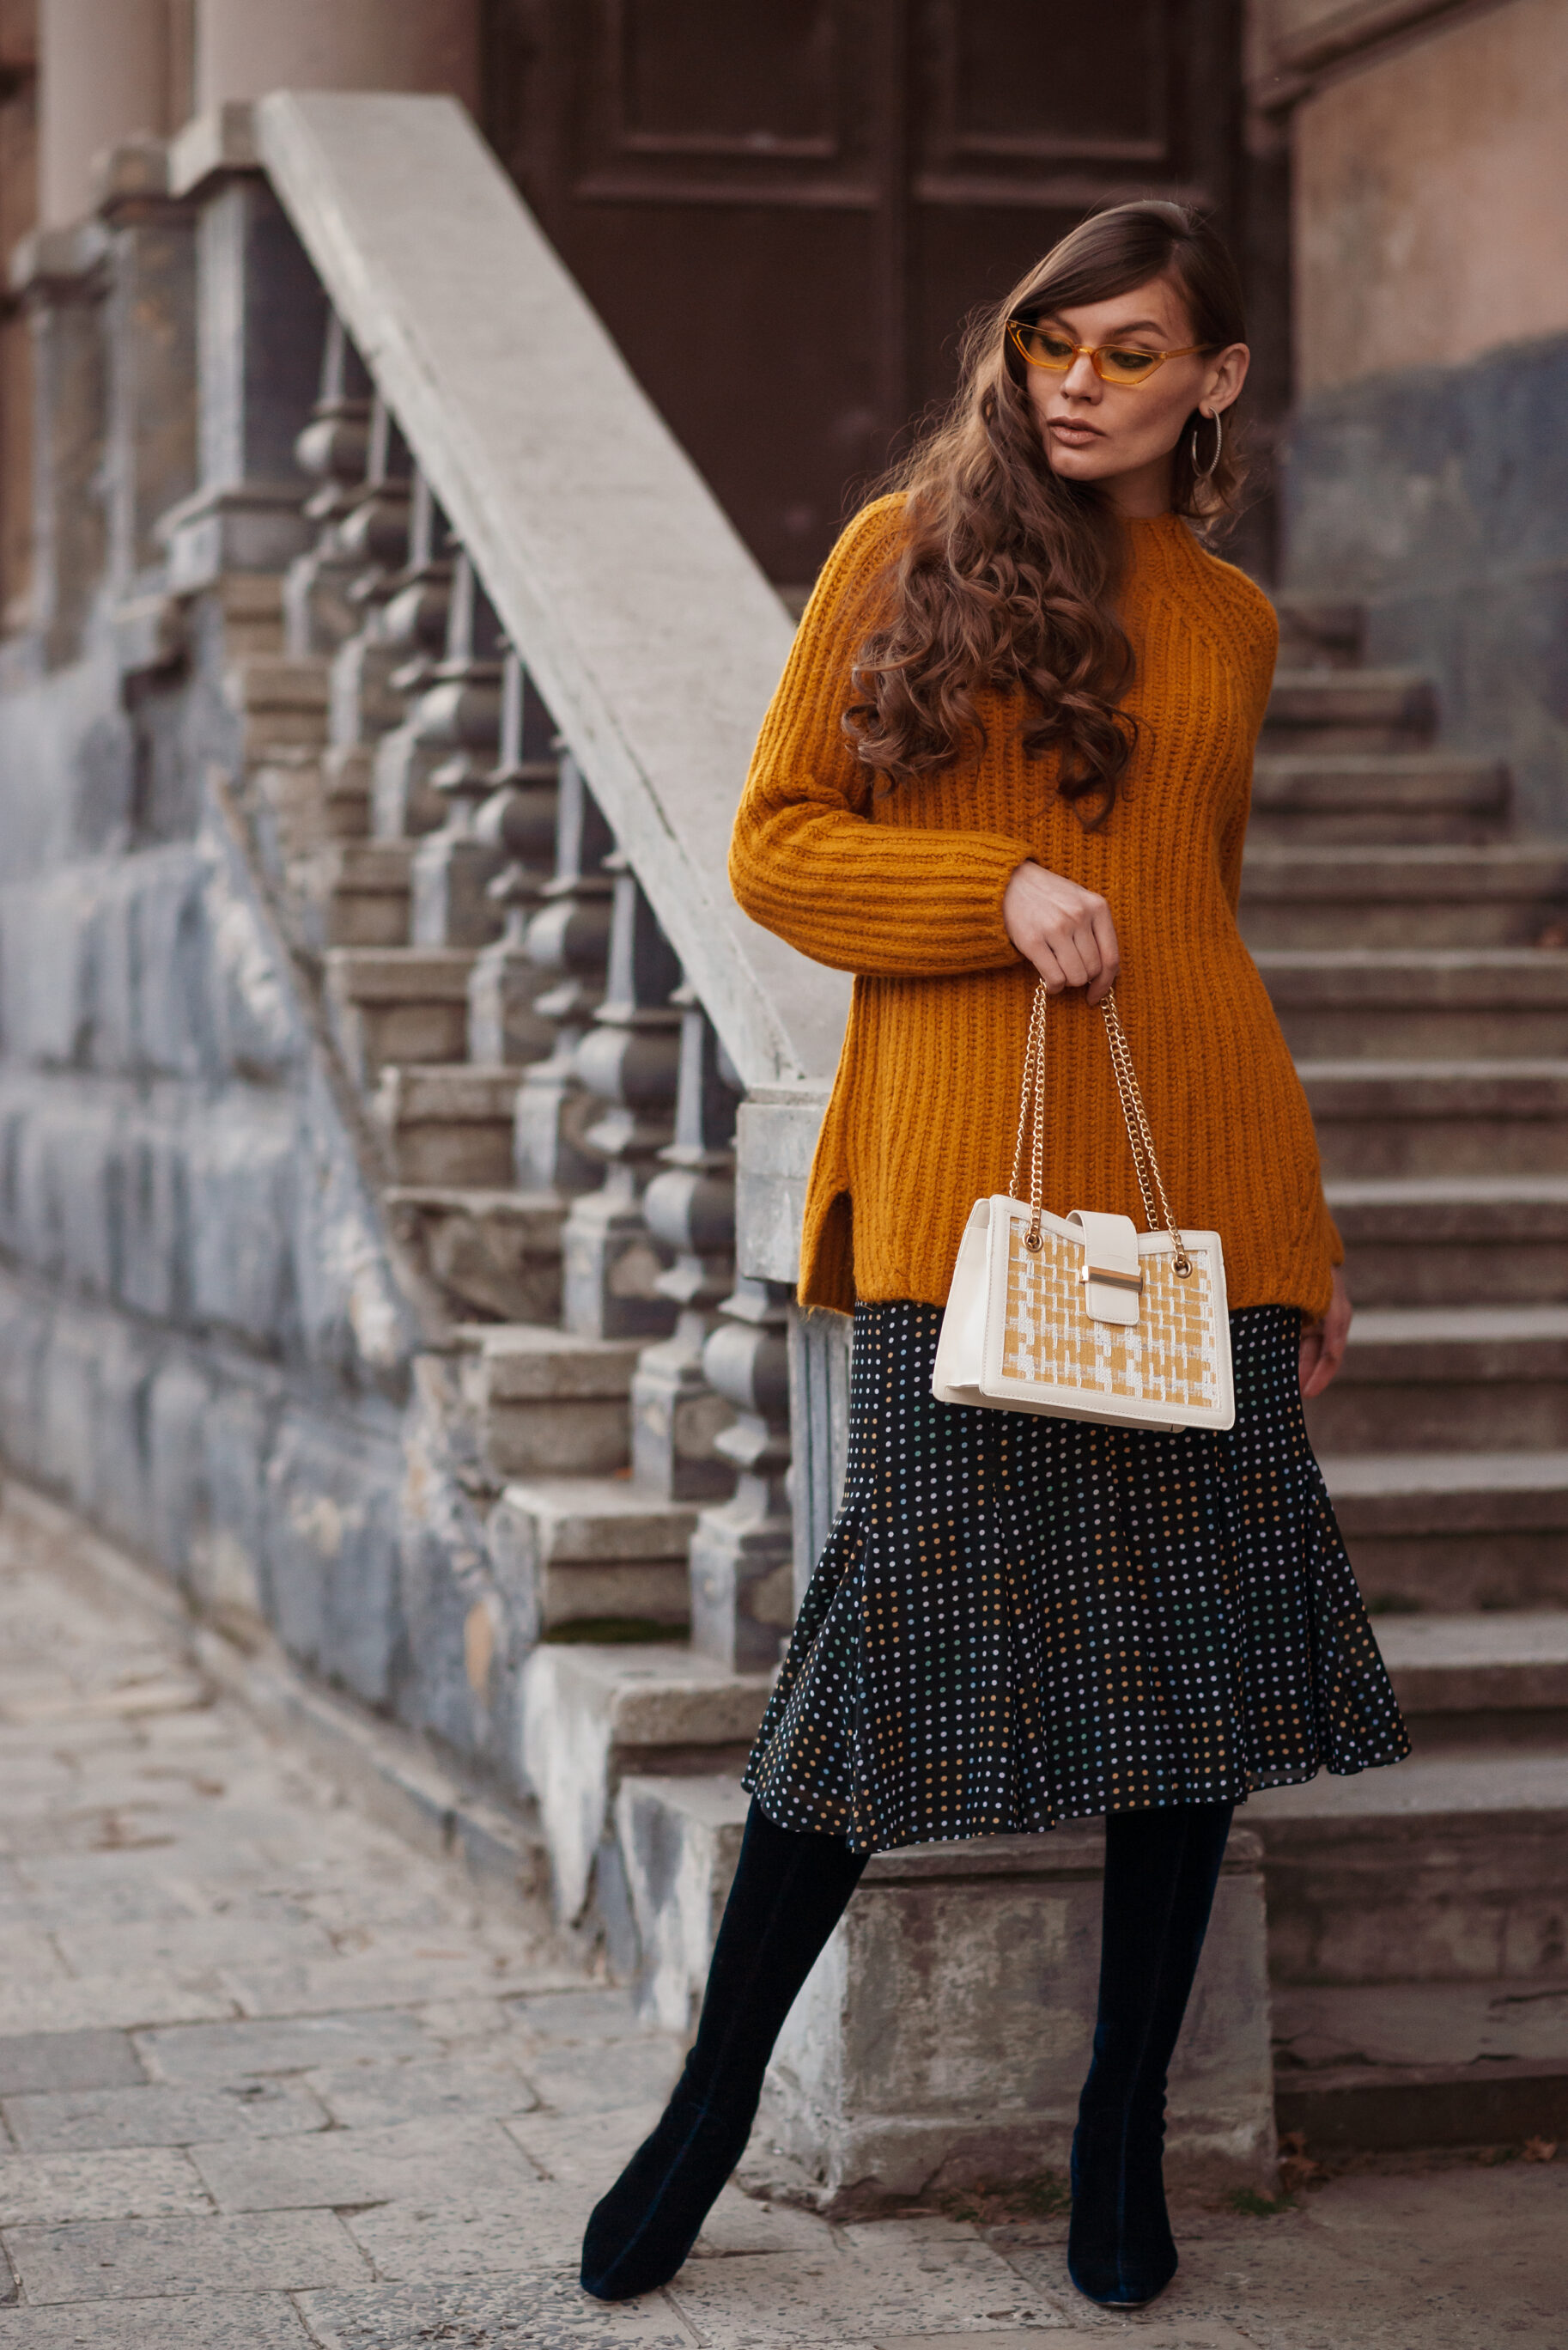  Midi Skirt With A Sweater